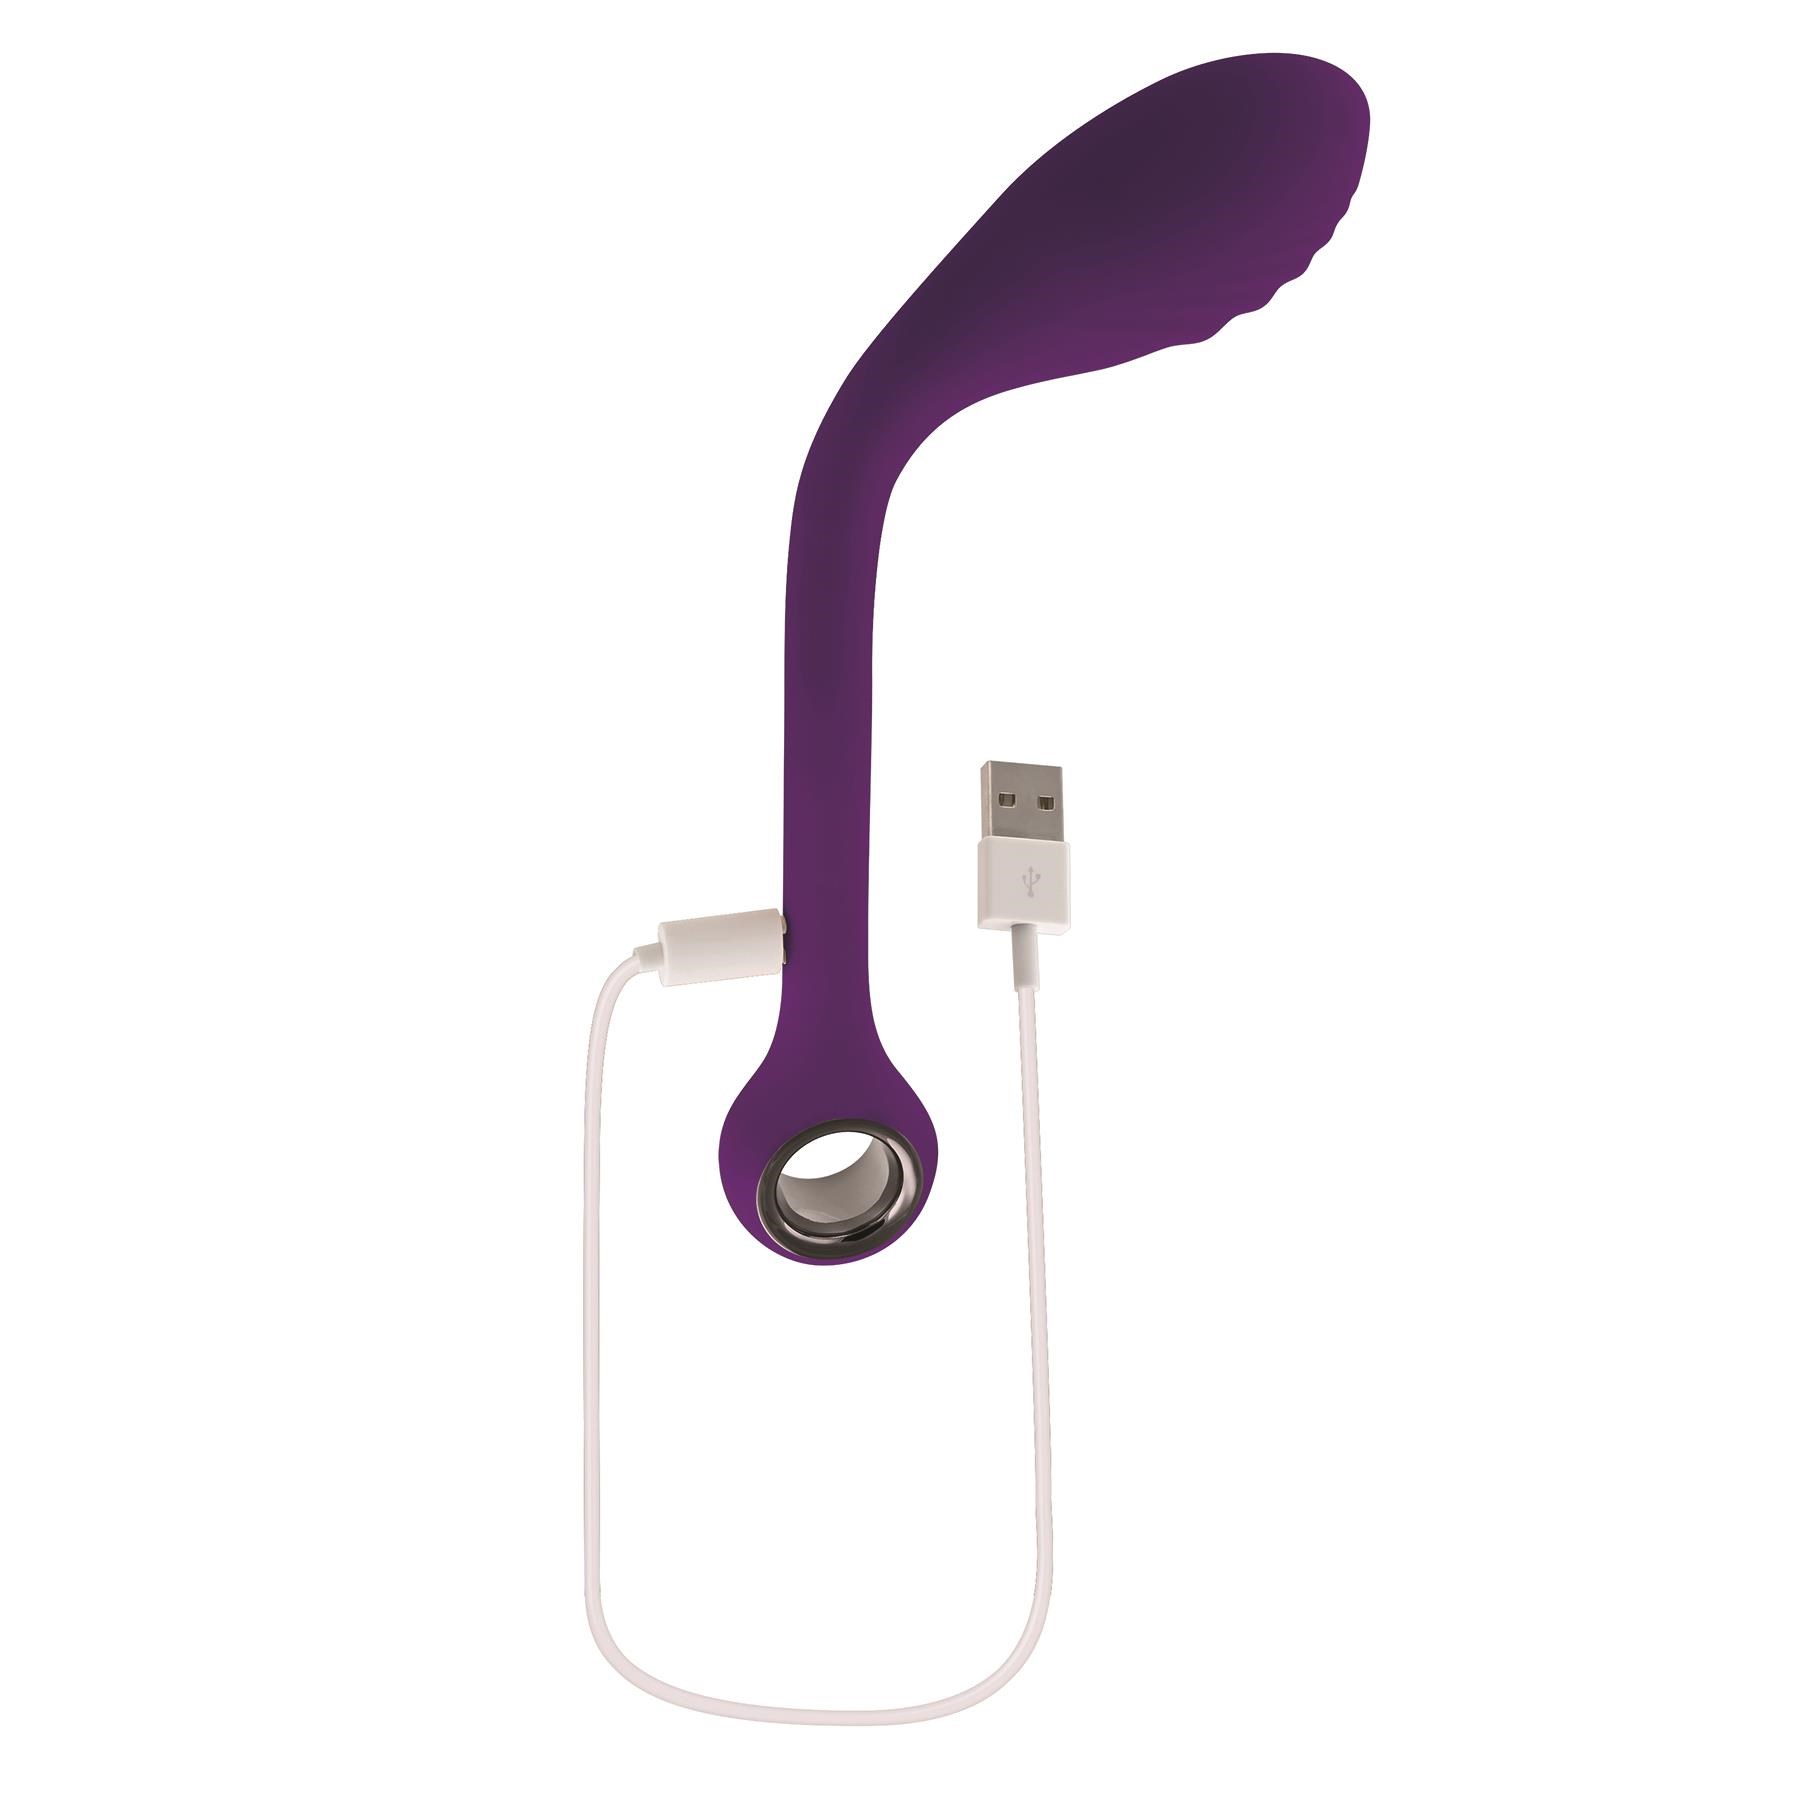 Playboy Pleasure Spot On G-Spot Massager - Showing Where Charger is Placed